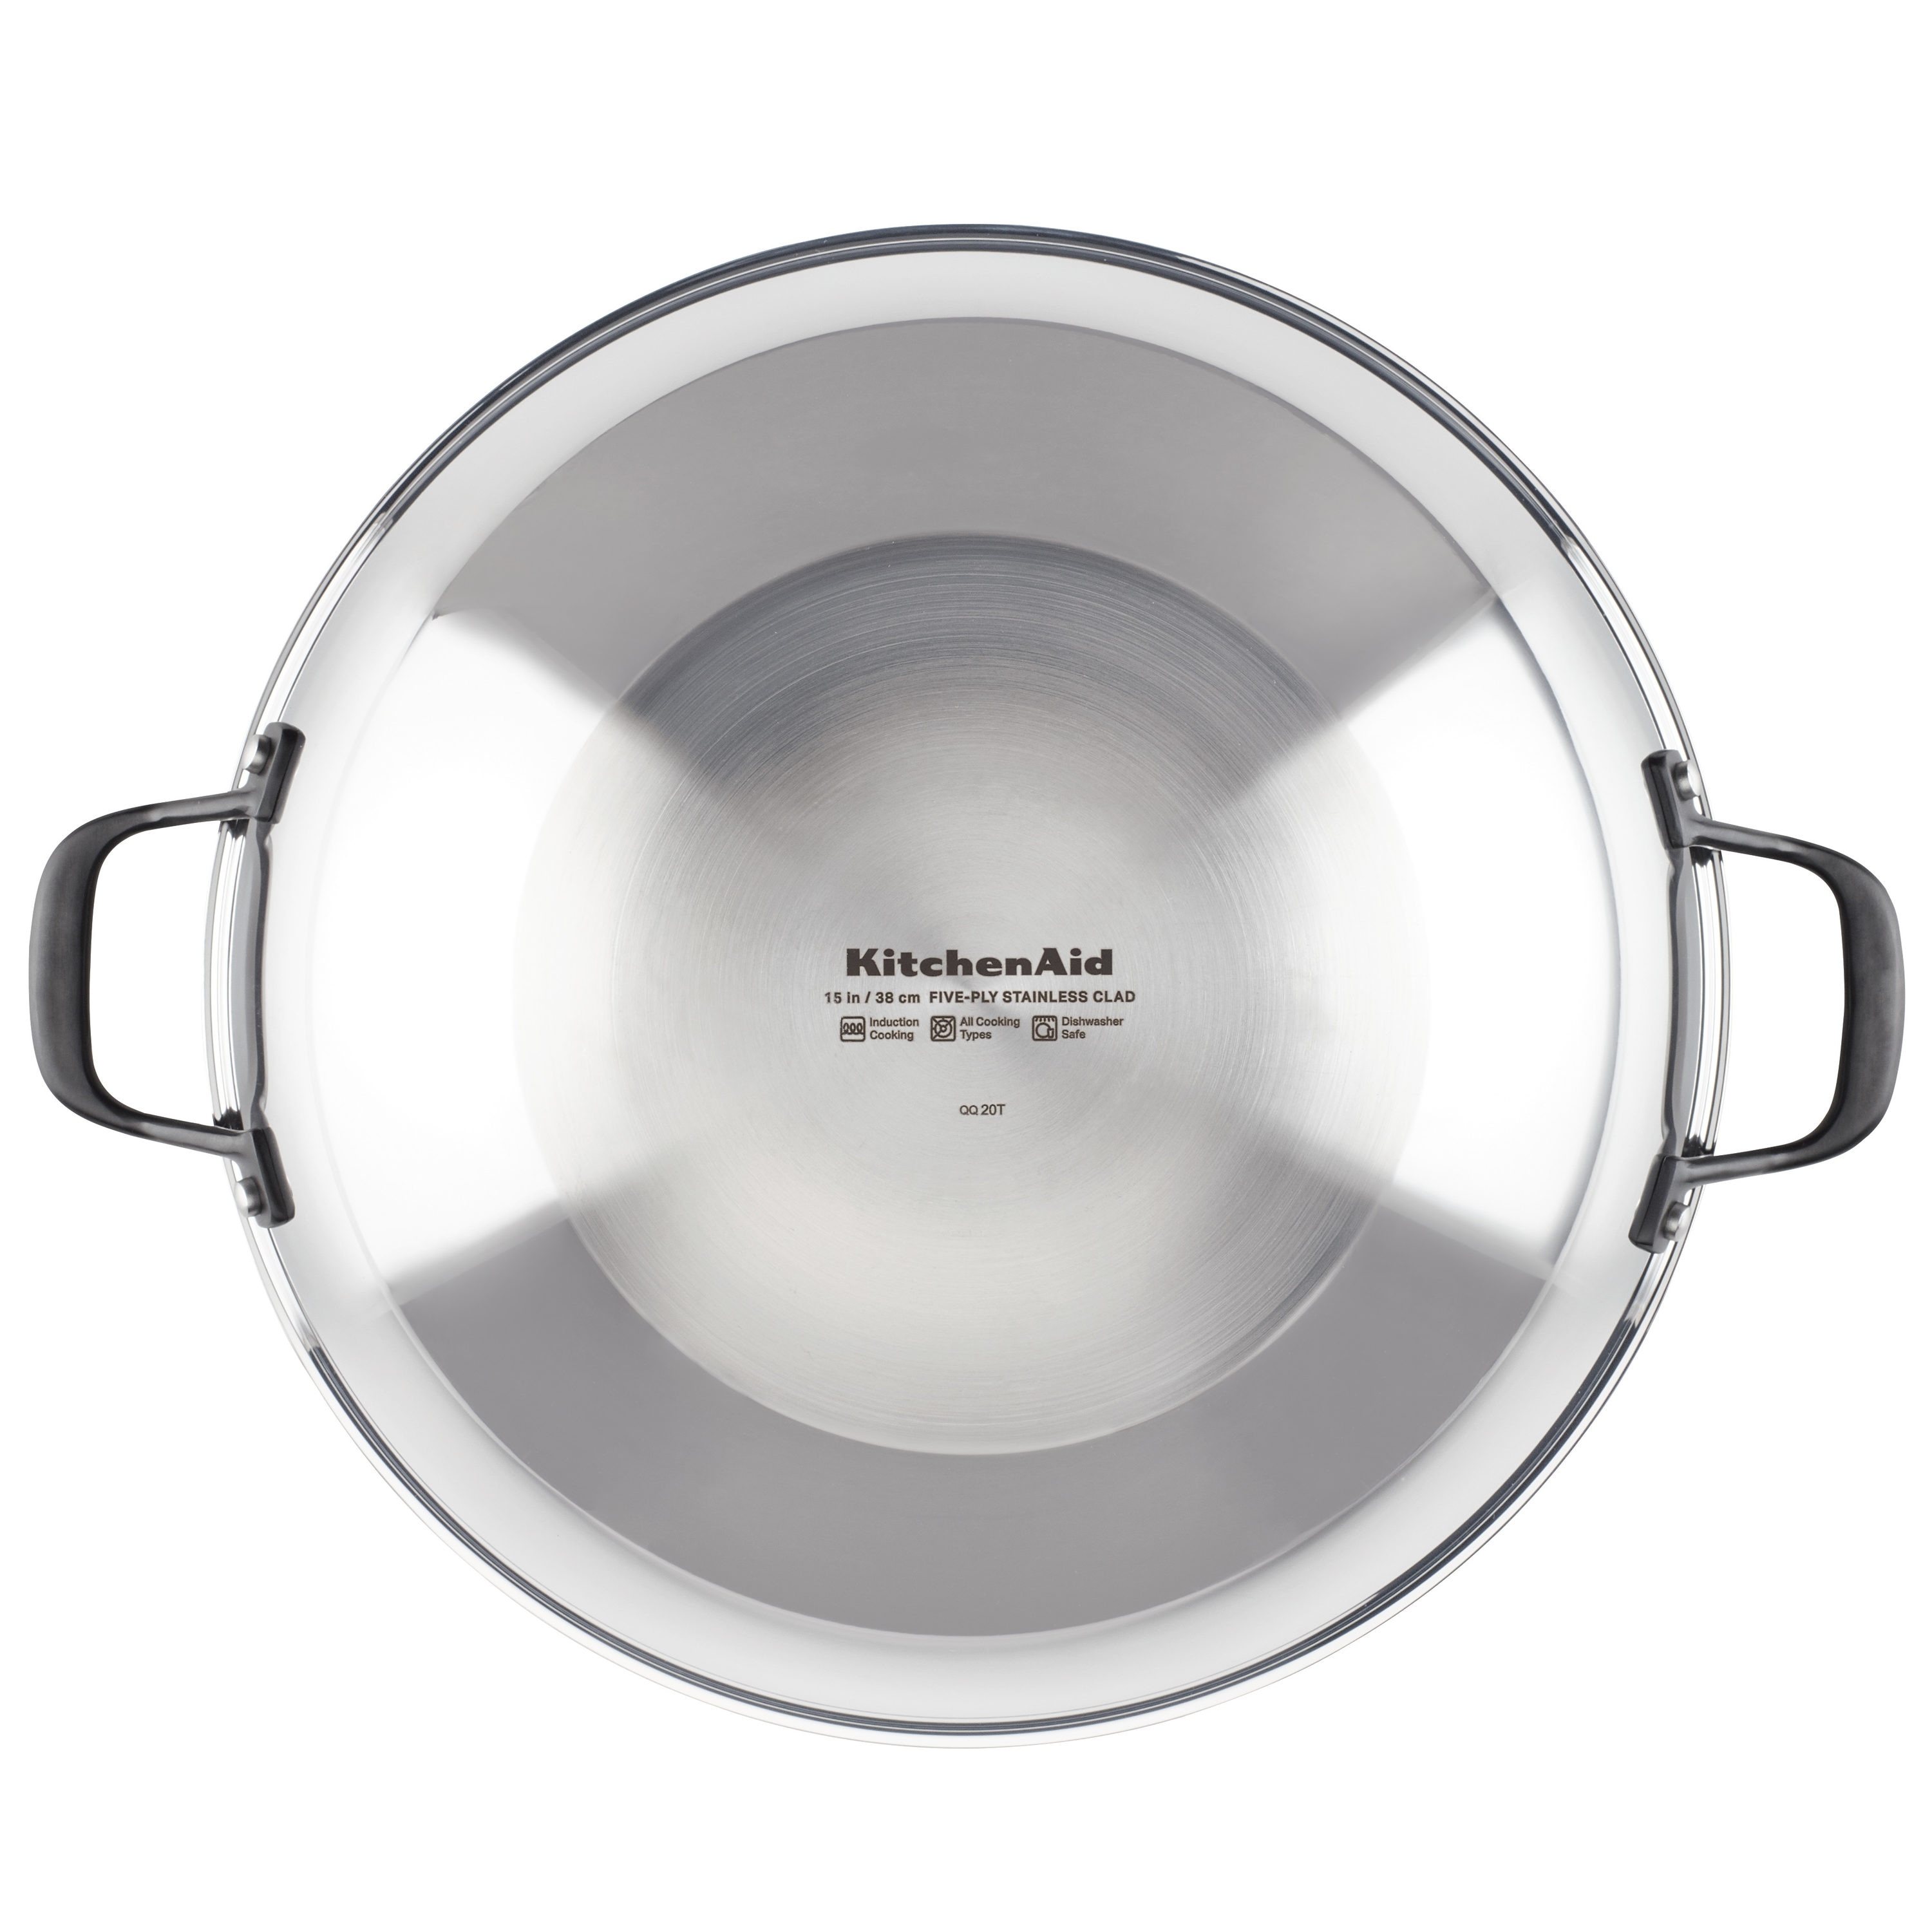 LOLYKITCH 10 Inch Tri-Ply Stainless Steel Wok Pan with Lid,Deep